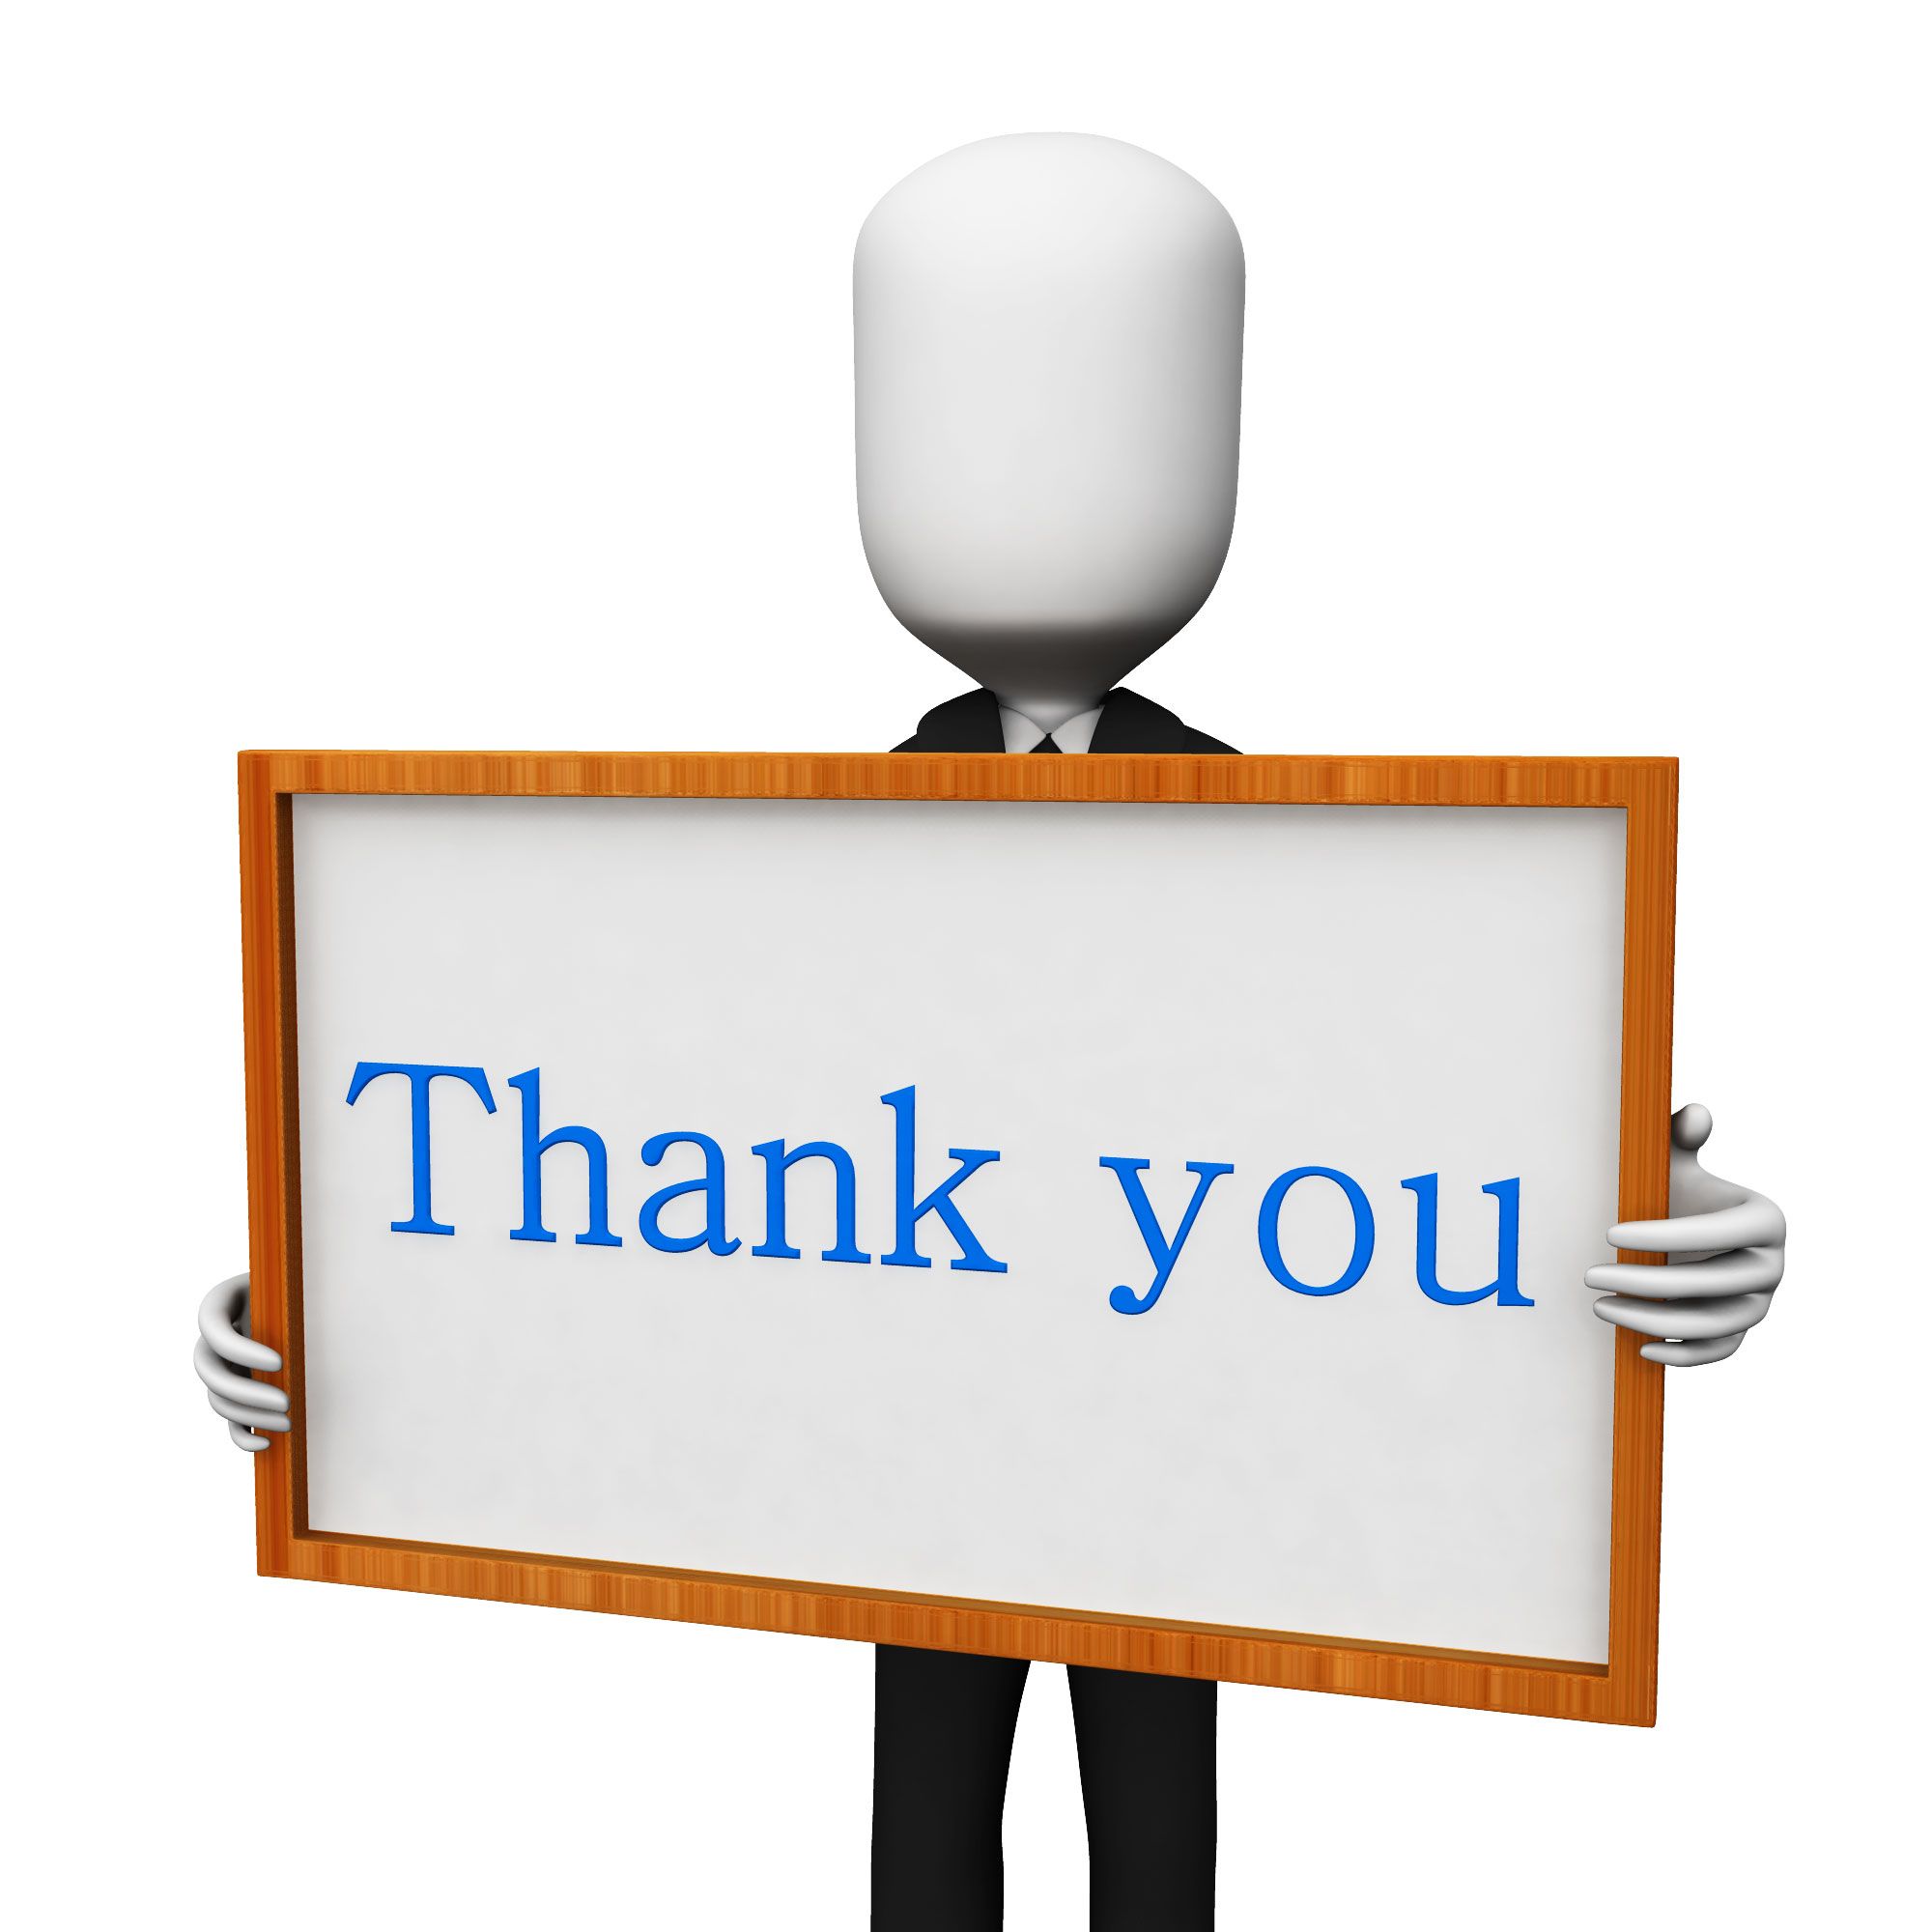 3d Man With Thank You Text Board Stock Photo Powerpoint Slide Presentation Sample Slide Ppt Template Presentation A thank you slide for ppt is a good choice for the following hypothetical scenarios 3d man with thank you text board stock